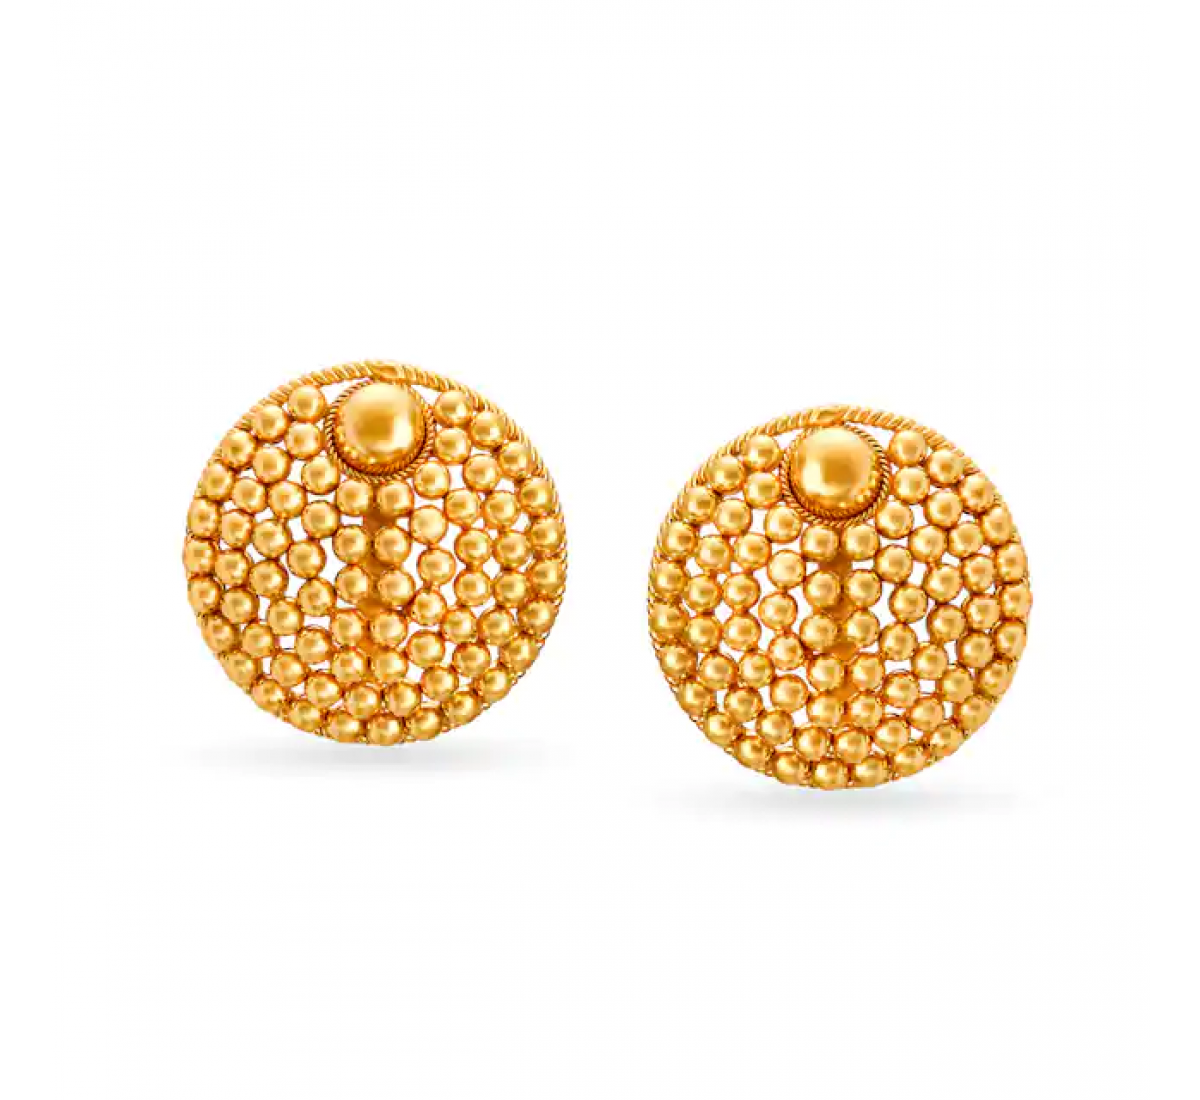 Share more than 237 gold earrings round design latest